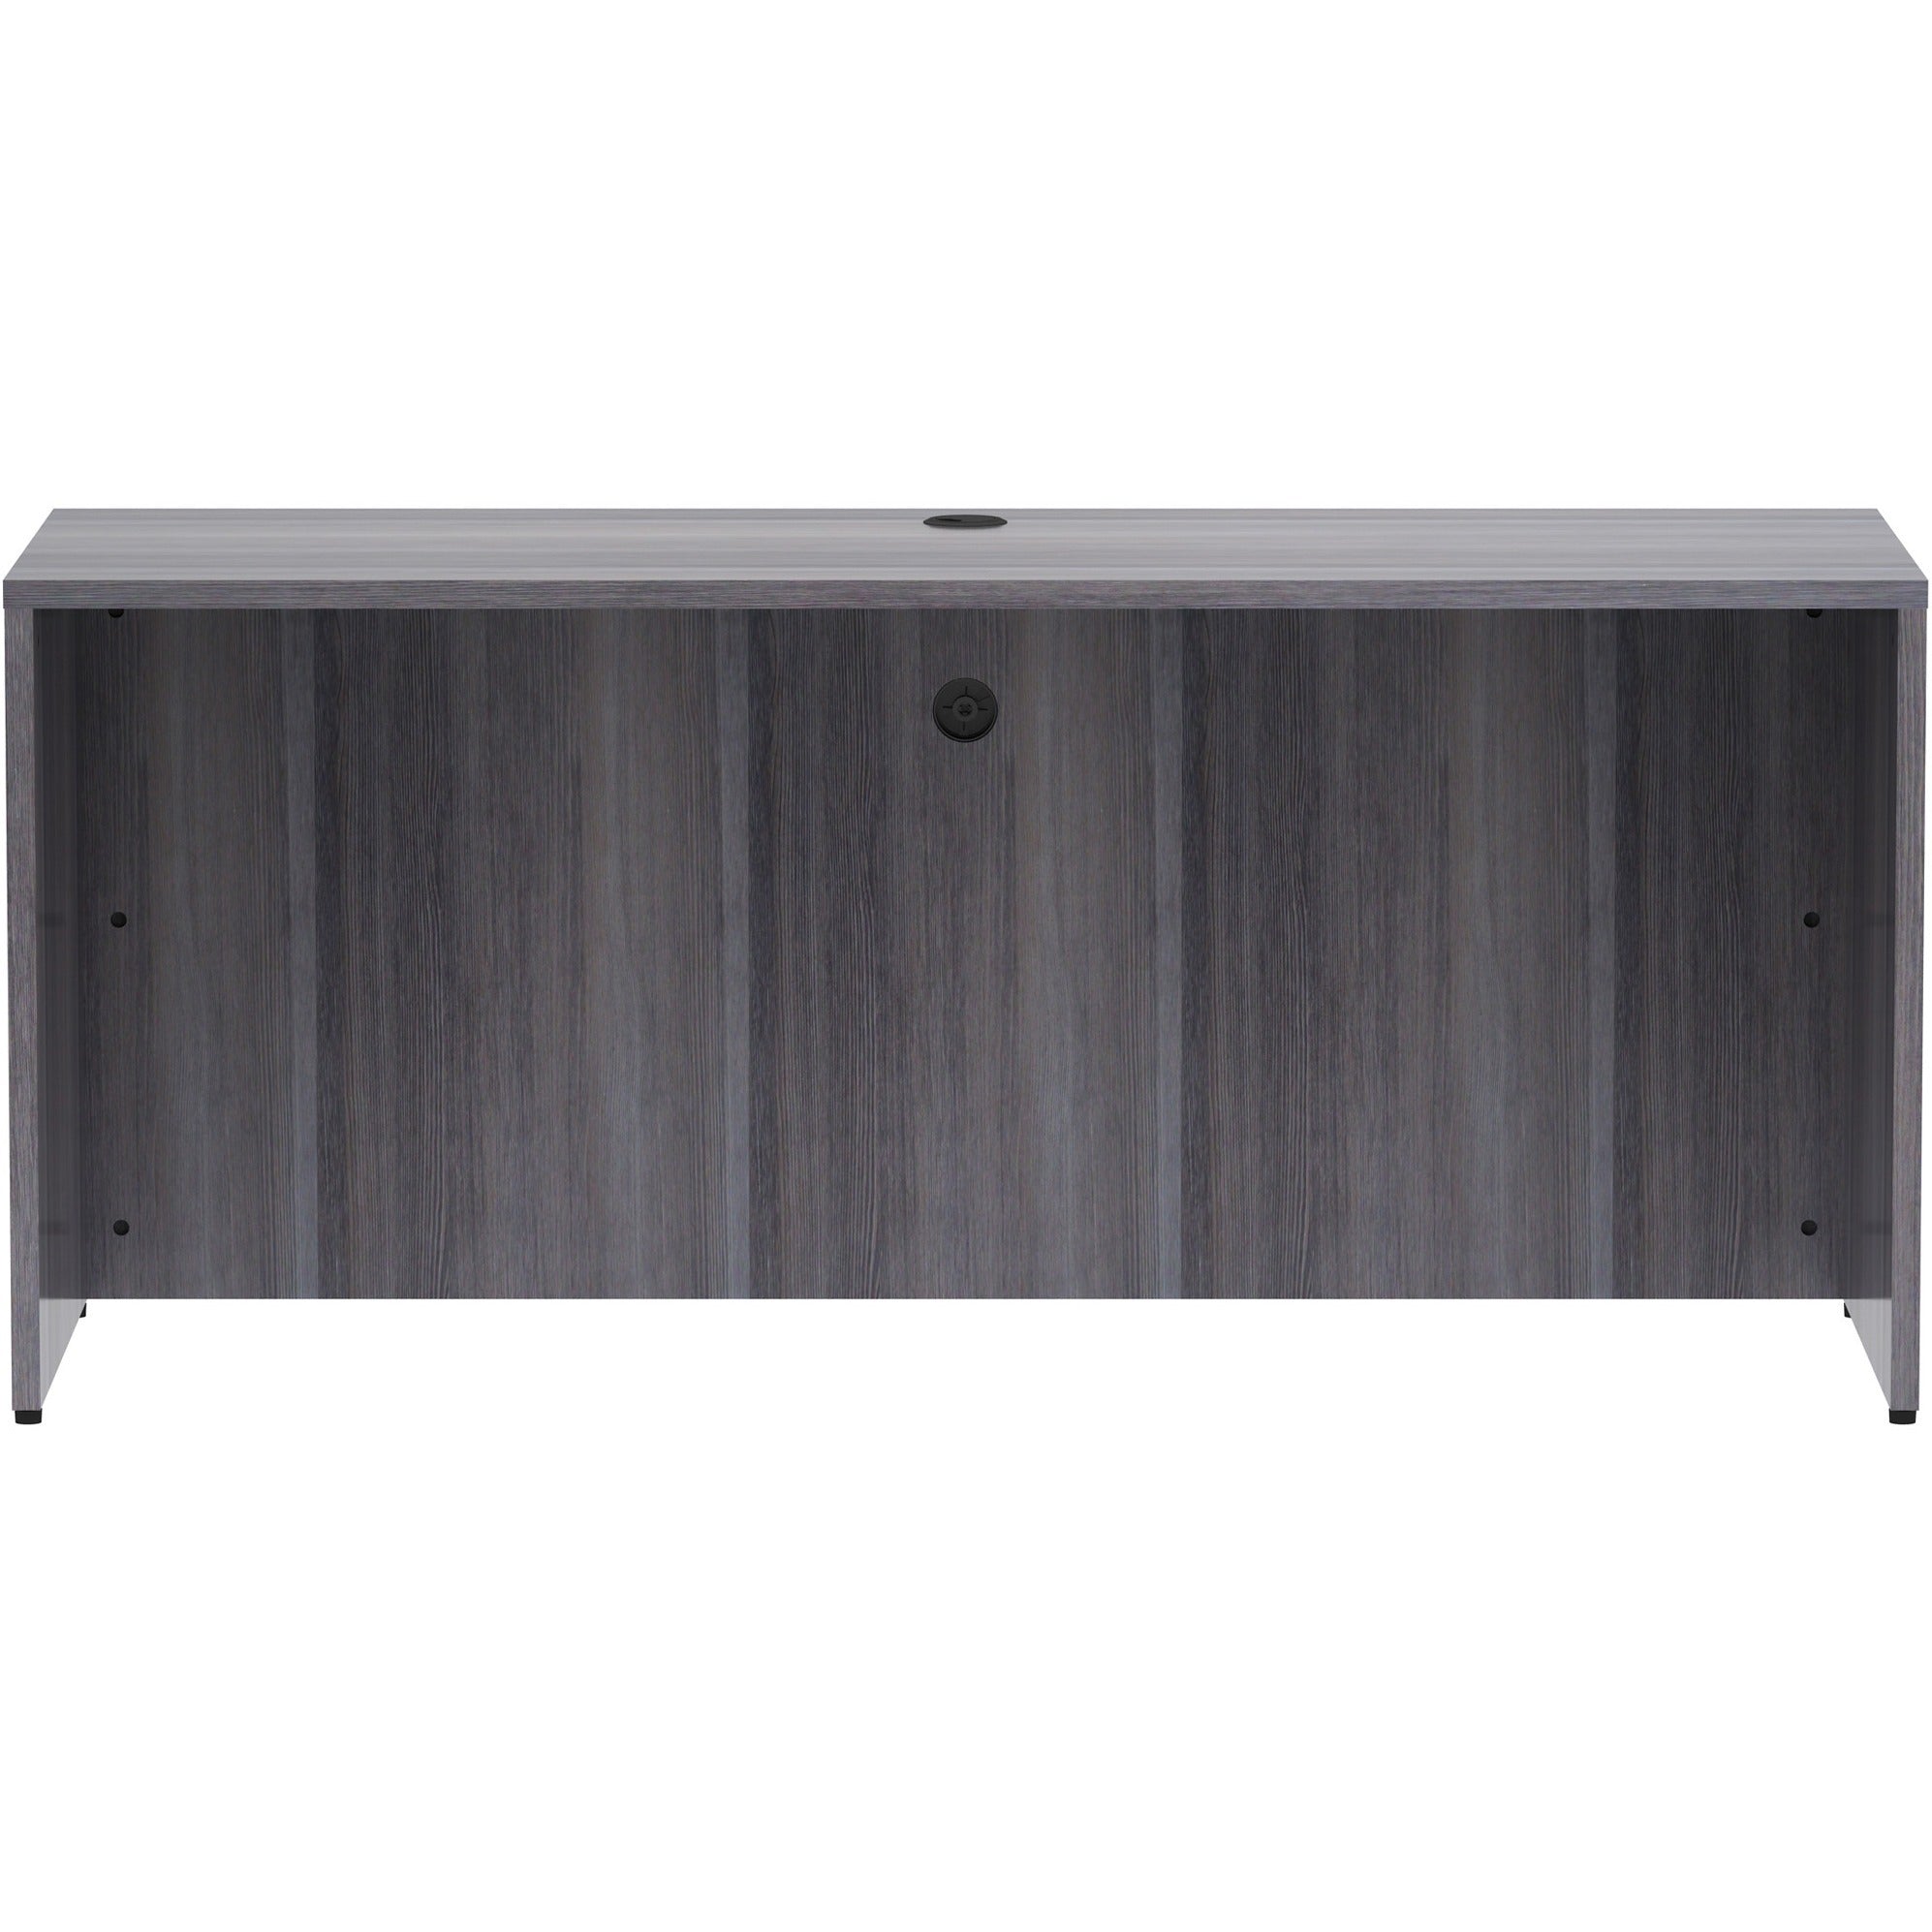 lorell-essentials-series-credenza-shell-66-x-24295-credenza-shell-1-top-finish-weathered-charcoal-laminate-silver-brush_llr69596 - 2